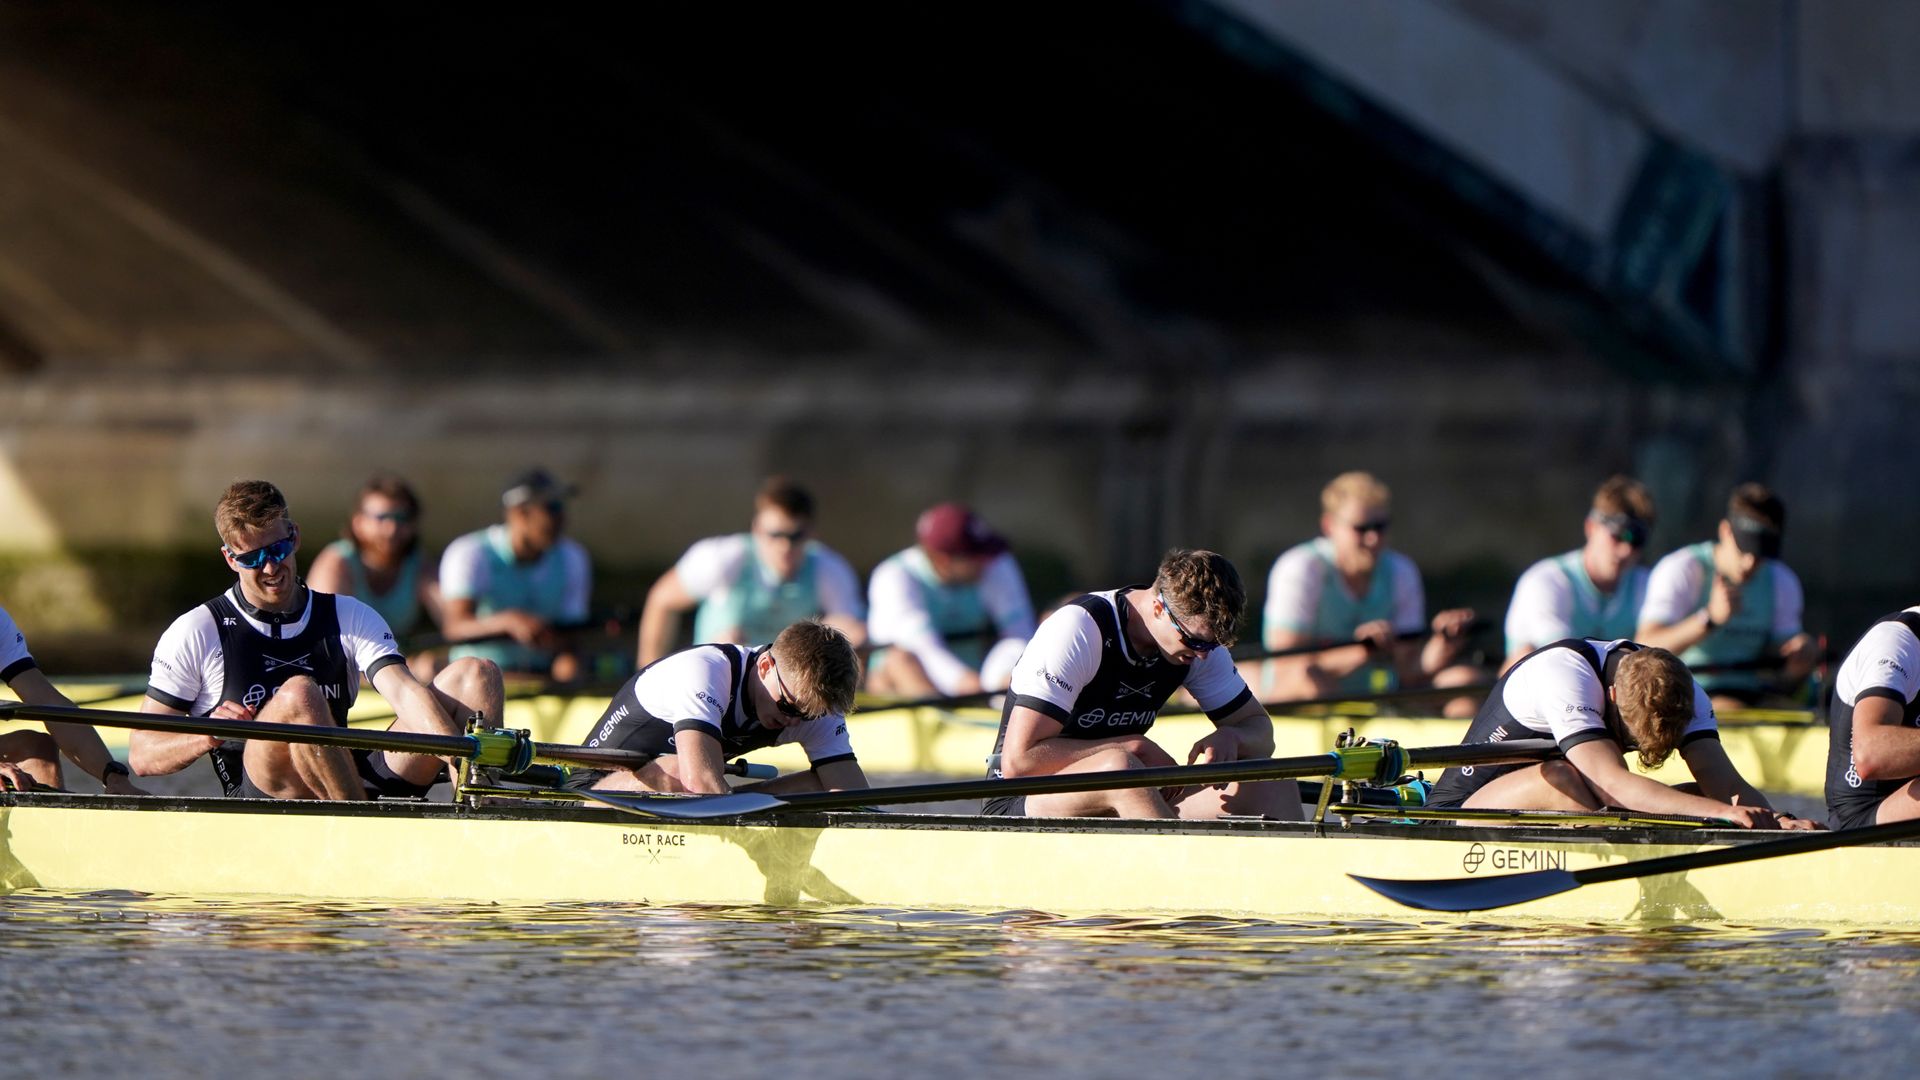 Oxford rower criticises 'poo' in Thames after Boat Race defeat